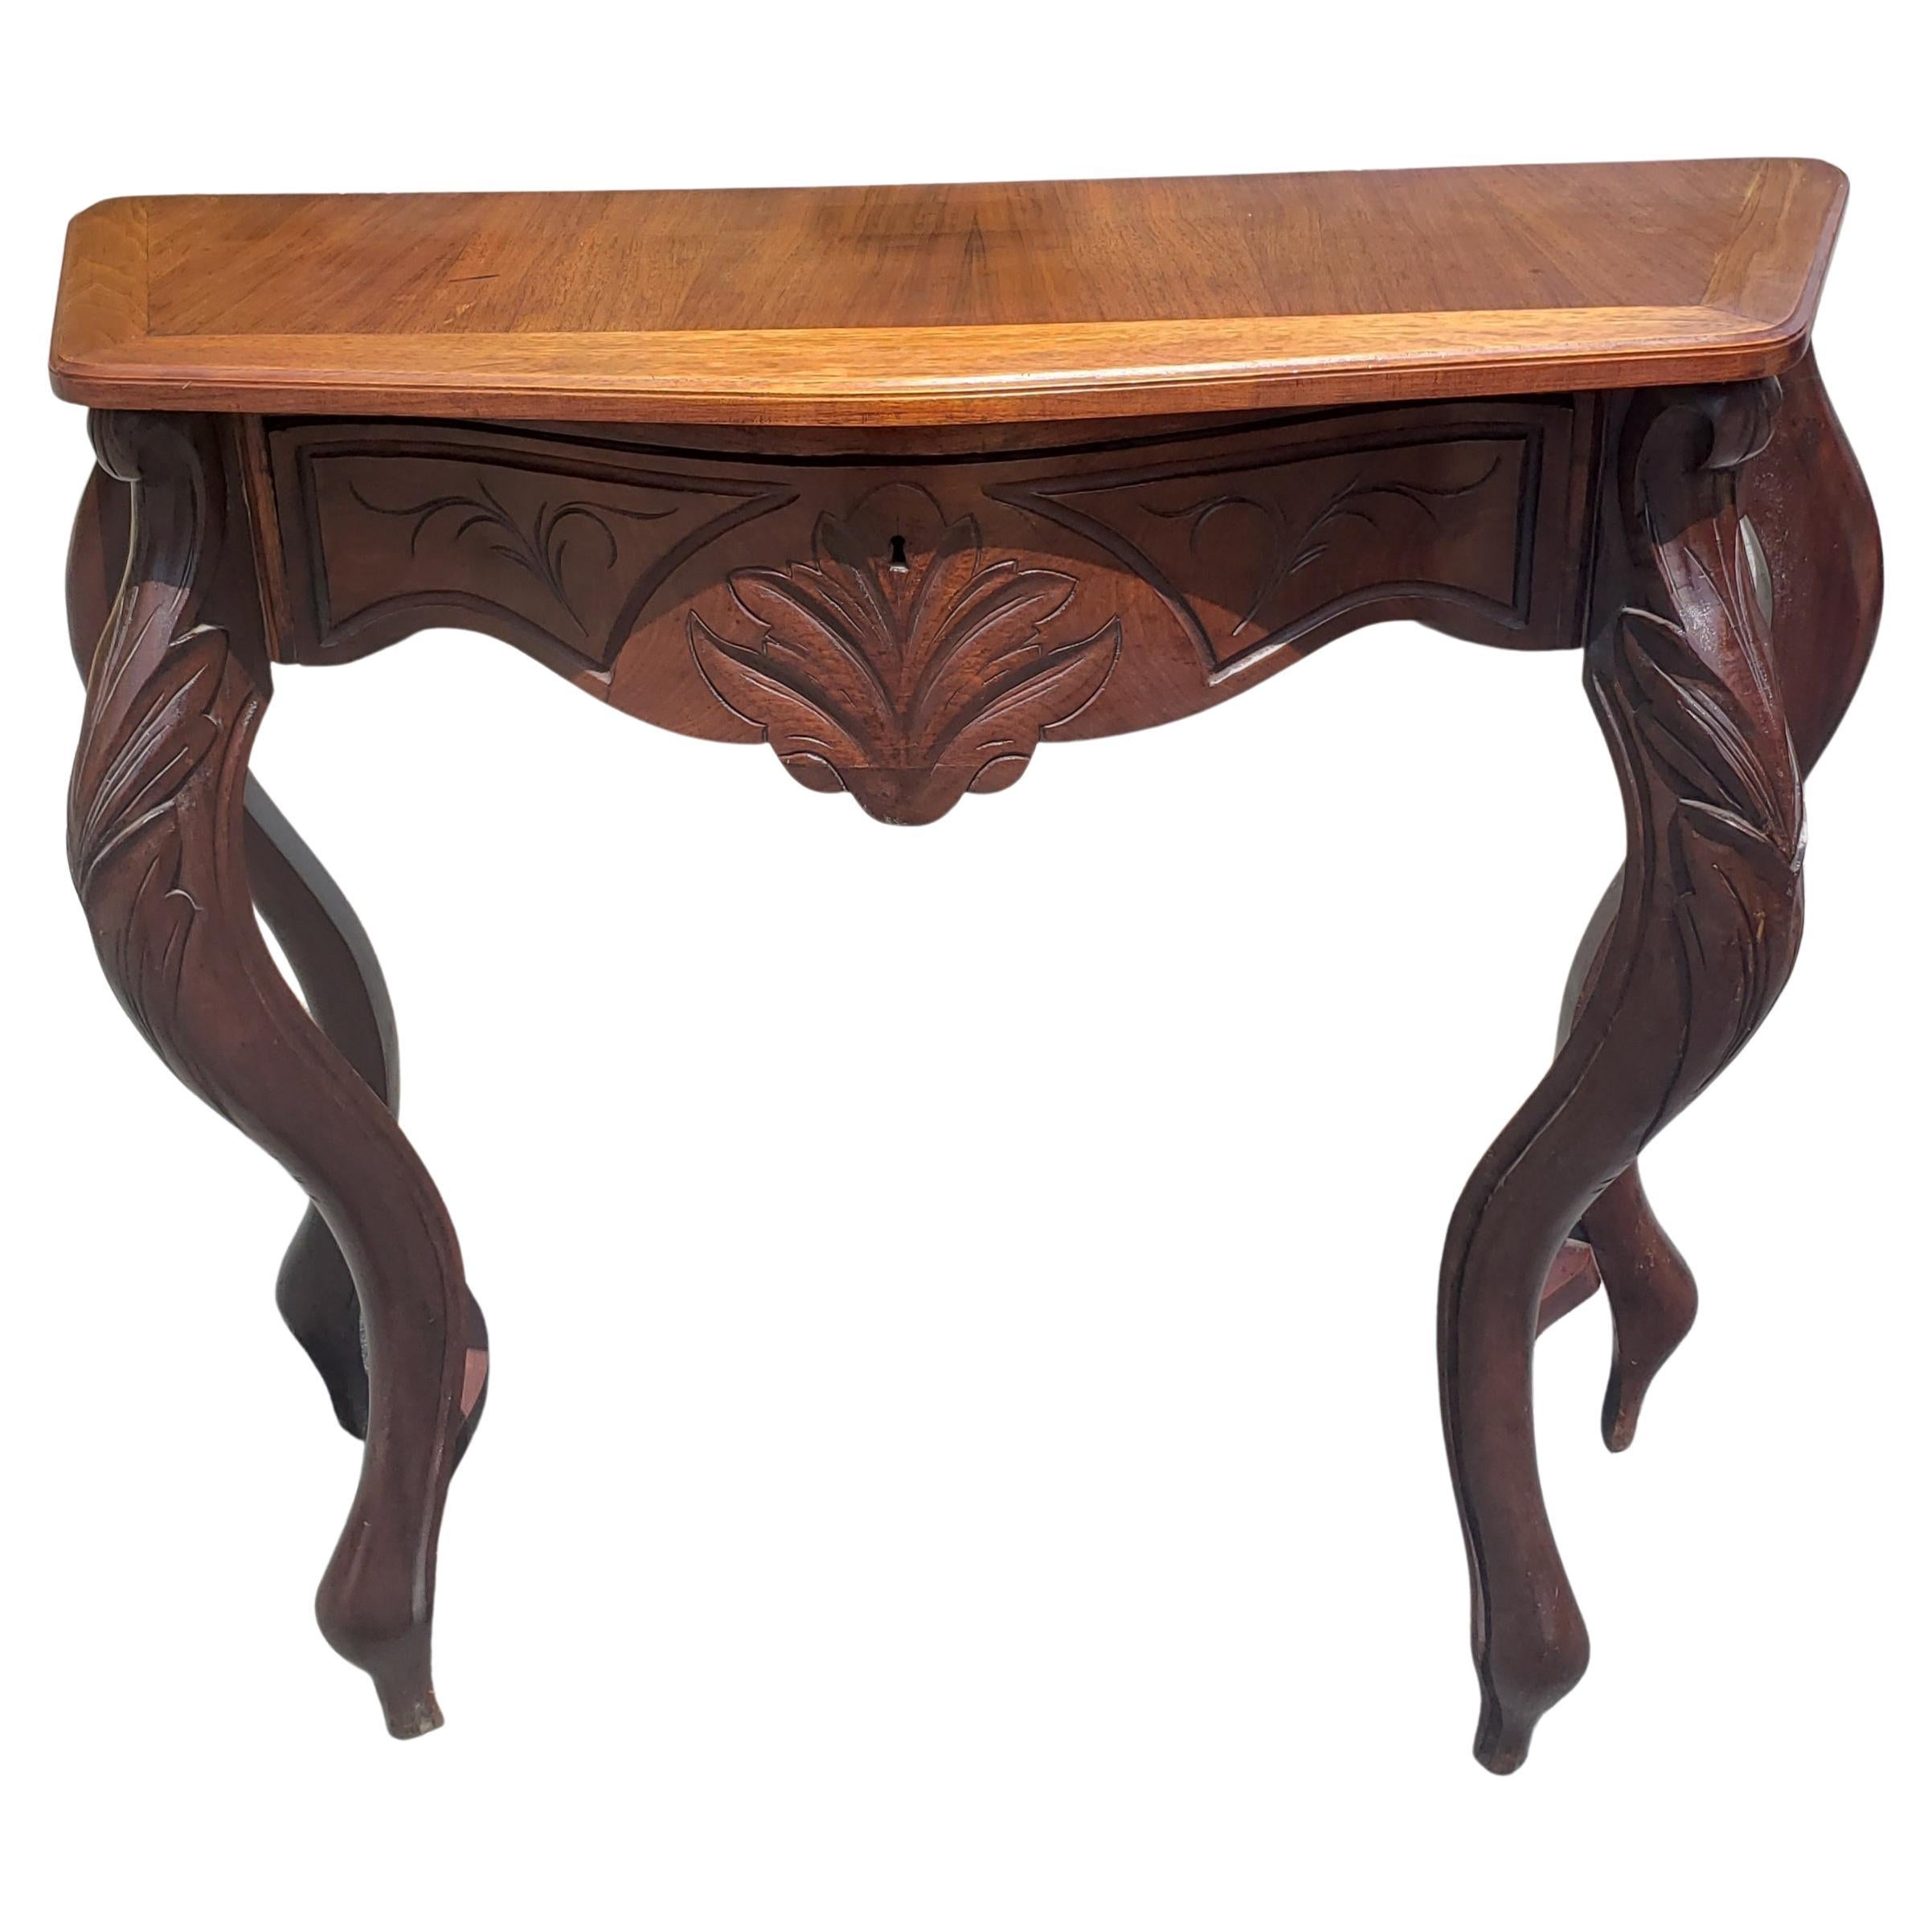 Hand-Carved Victorian Rococo Style One Drawer Mahogany Console Table, circa 1890s For Sale